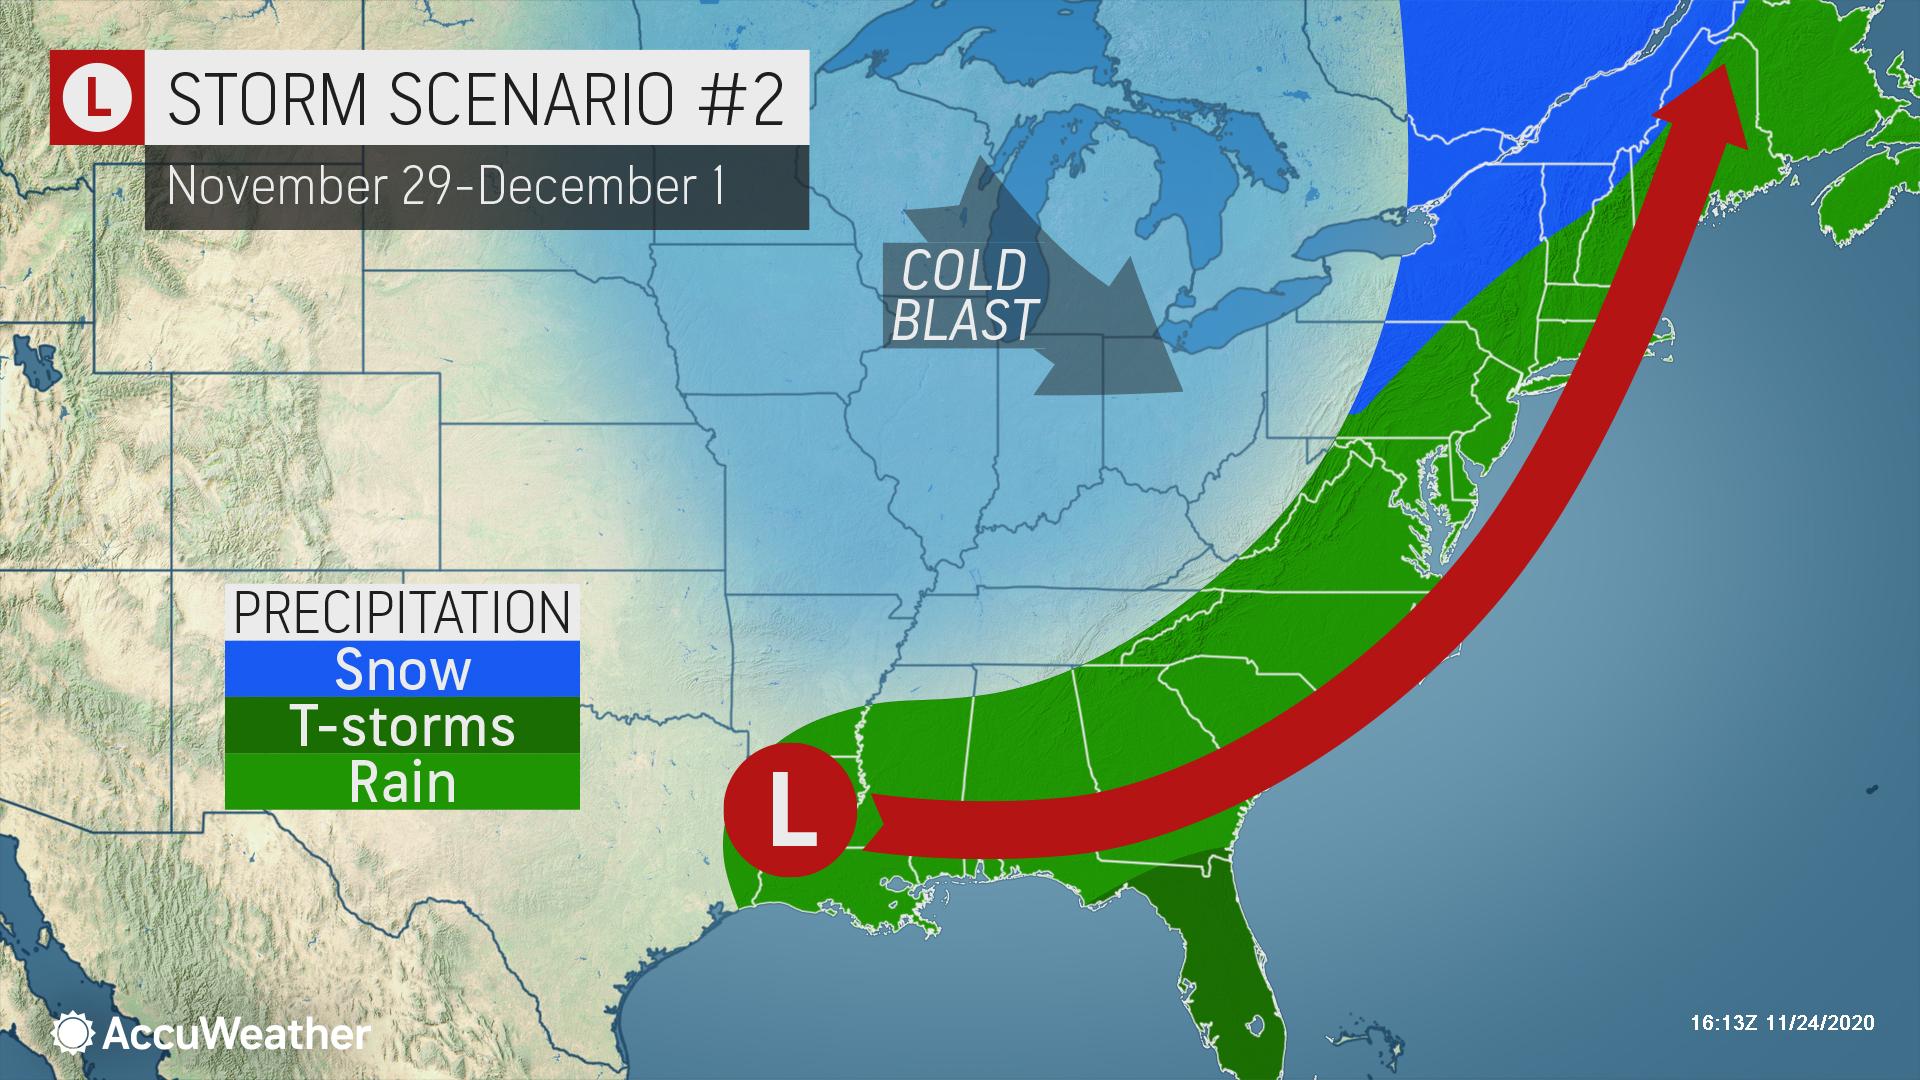 Storm scenario 2 - snow in central PA, NY, and VT. Rain along the eastern states, thunderstorms in FL.